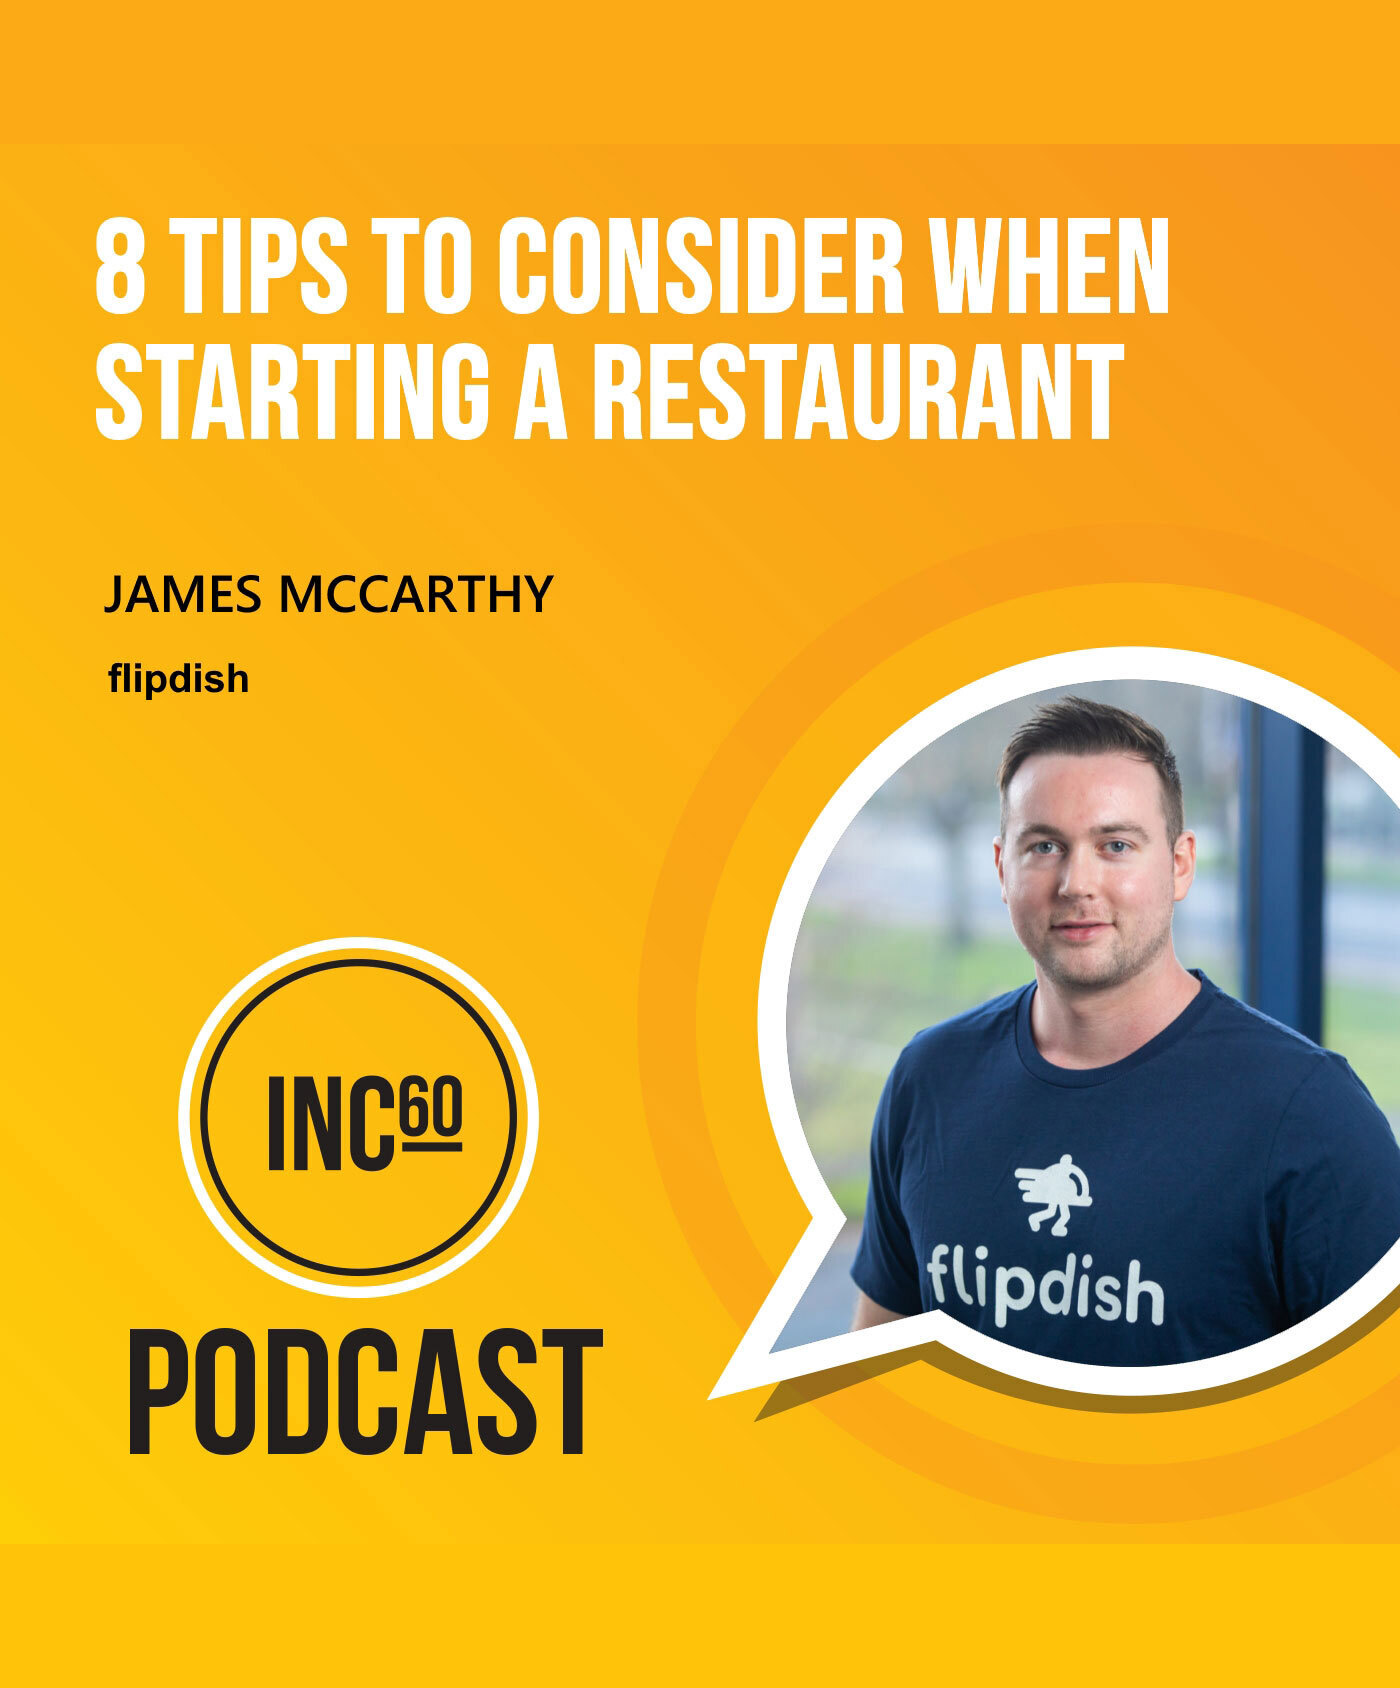 Podcast with Inc60: Thinking of Starting a Restaurant?